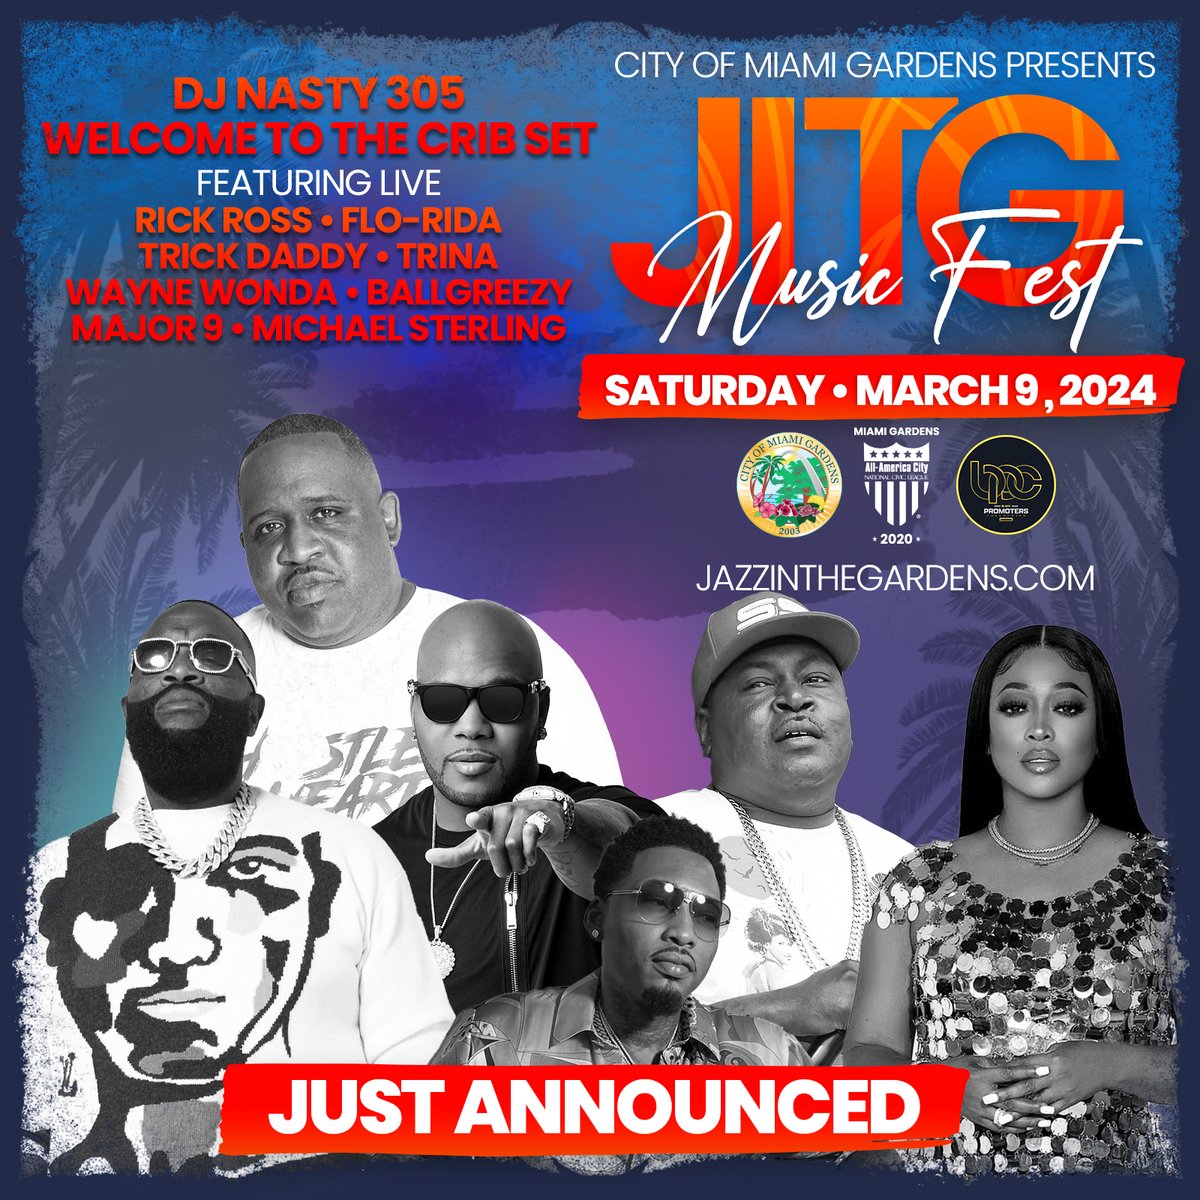 🔥👀 Surprise drop! DJ Nasty 305 is bringing the ultimate 'Welcome to the Crib Set' to #JITG2024, featuring Miami's finest: Rick Ross, Flo Rida, Trick Daddy, Trina, Wayne Wonda, Ball Greezy, Major 9, & Michael Sterling. Secure your spot TODAY! #JITG #JITGMusicFest 🌴✨